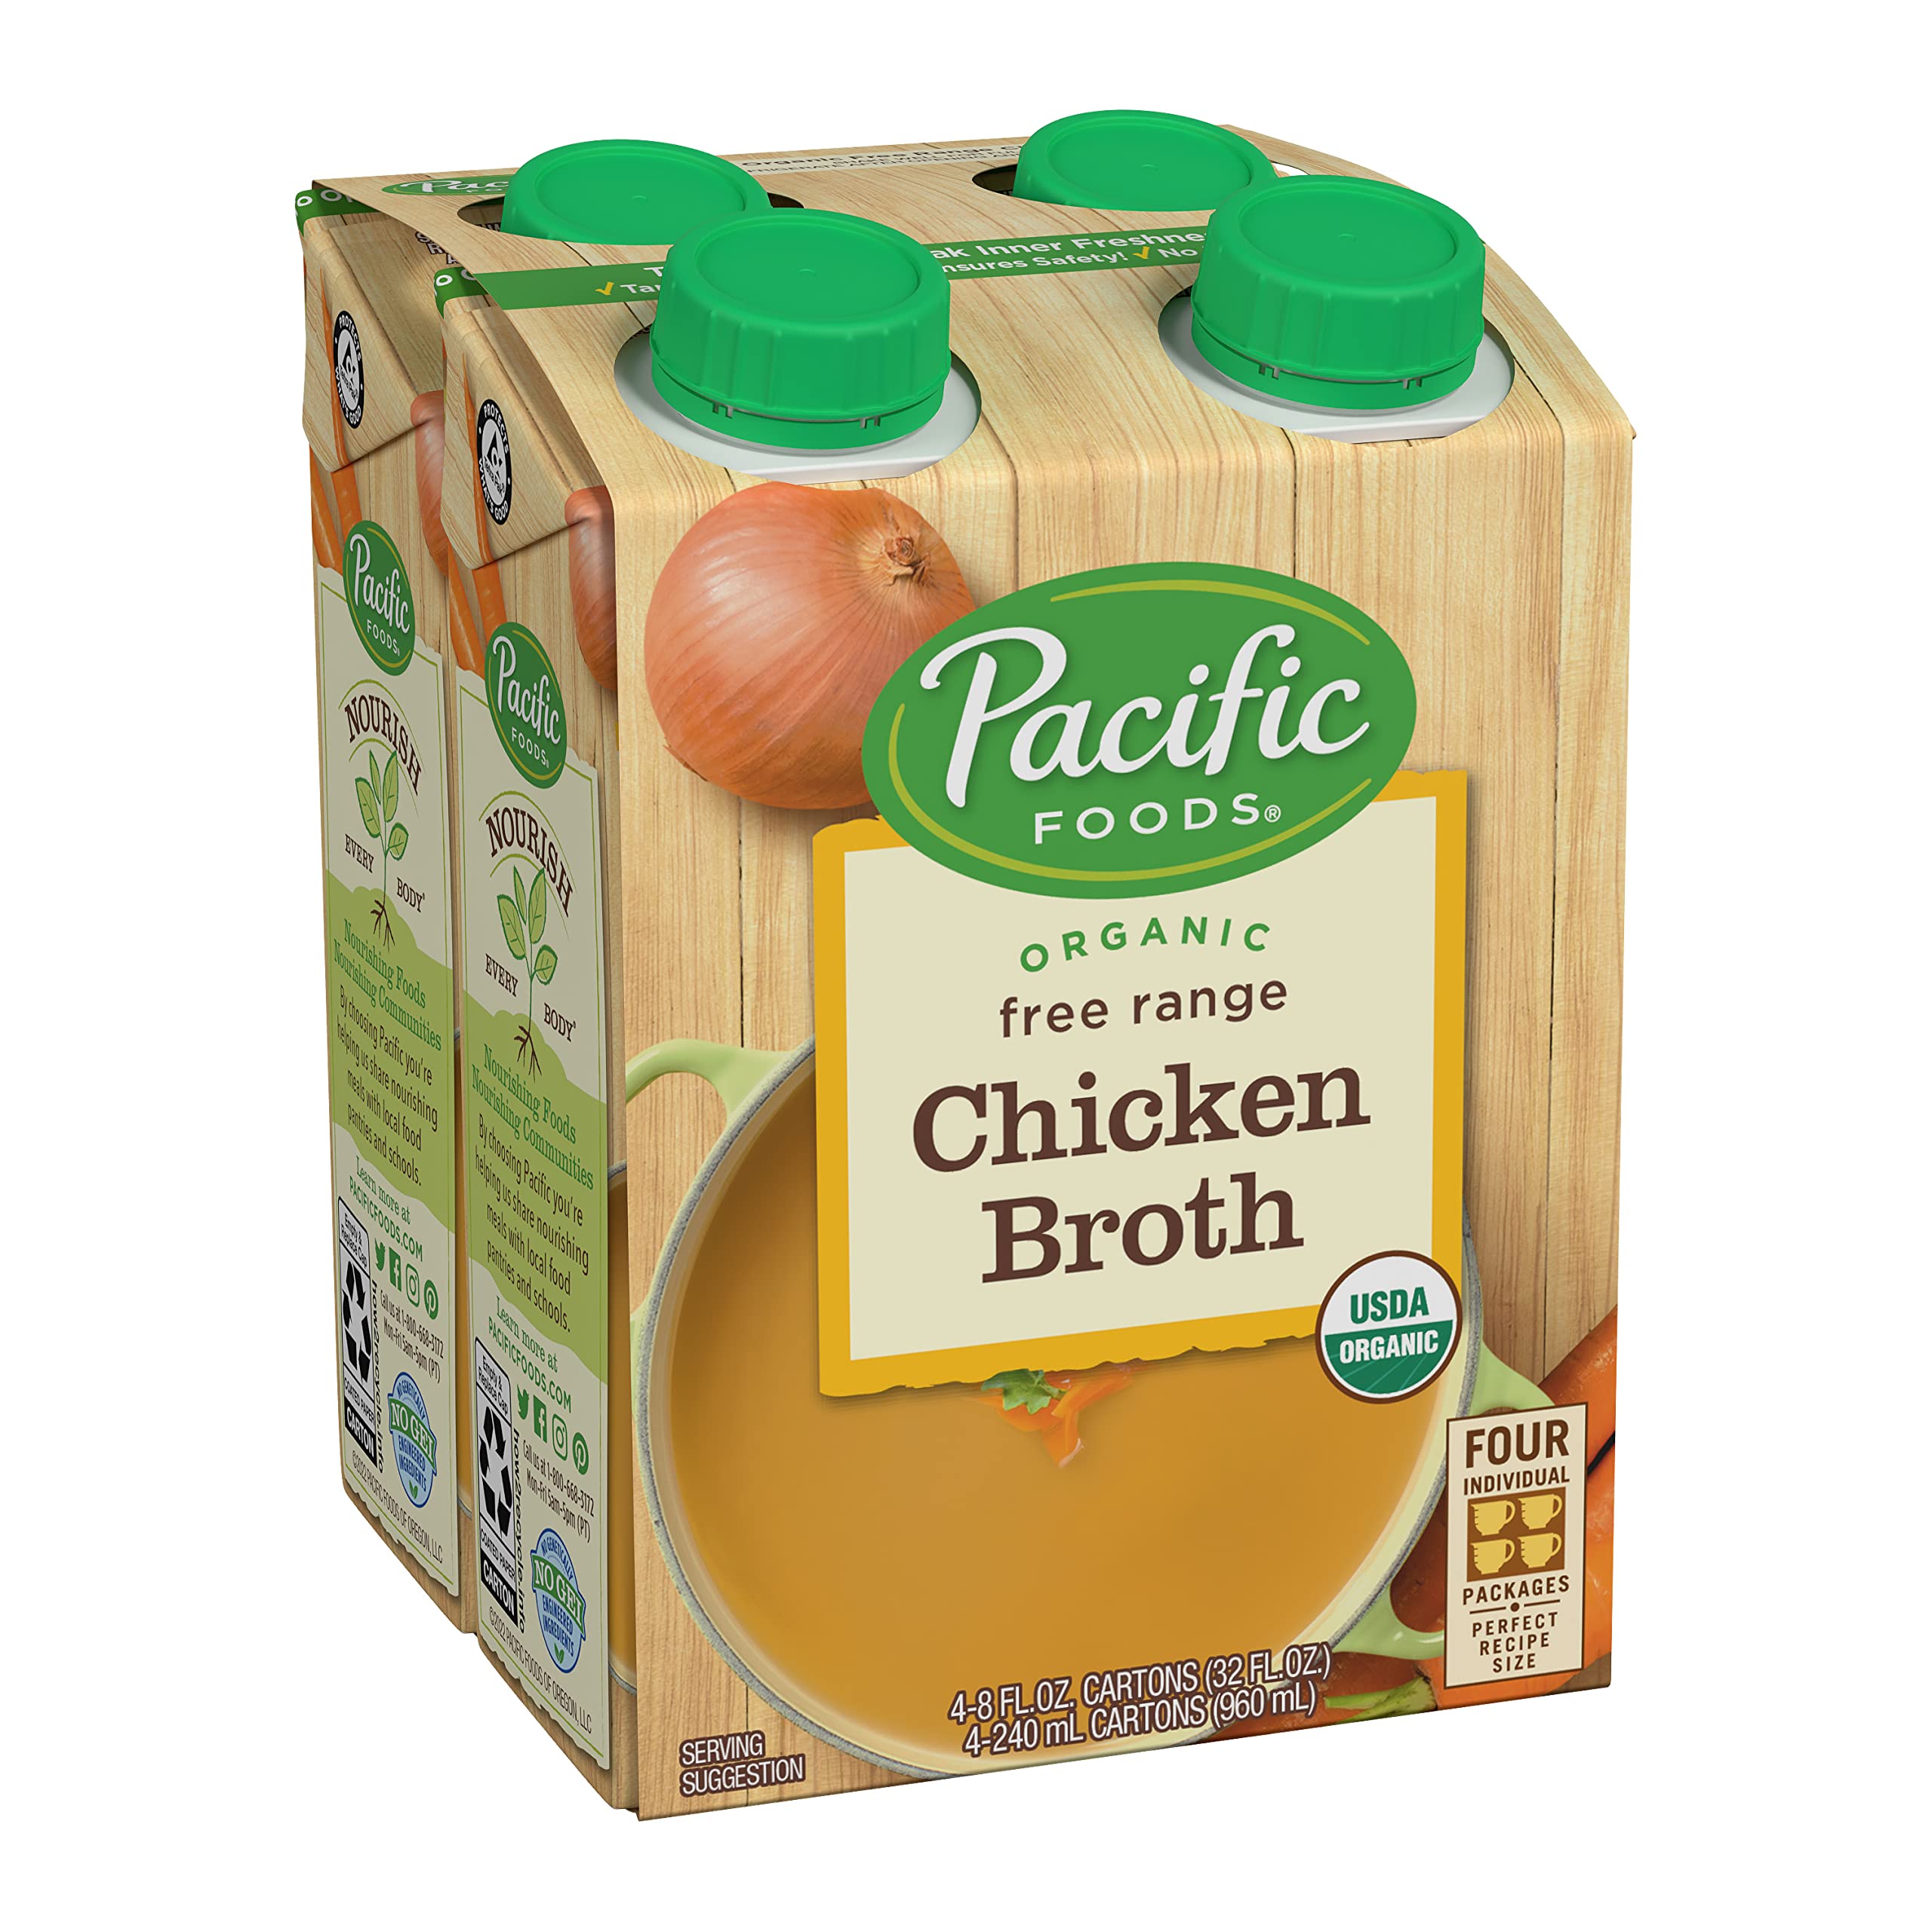 4-Pack 8-Oz Pacific Foods Organic Free Range Chicken Broth $2.54 + Free Shipping w/ Prime or on Orders $35+